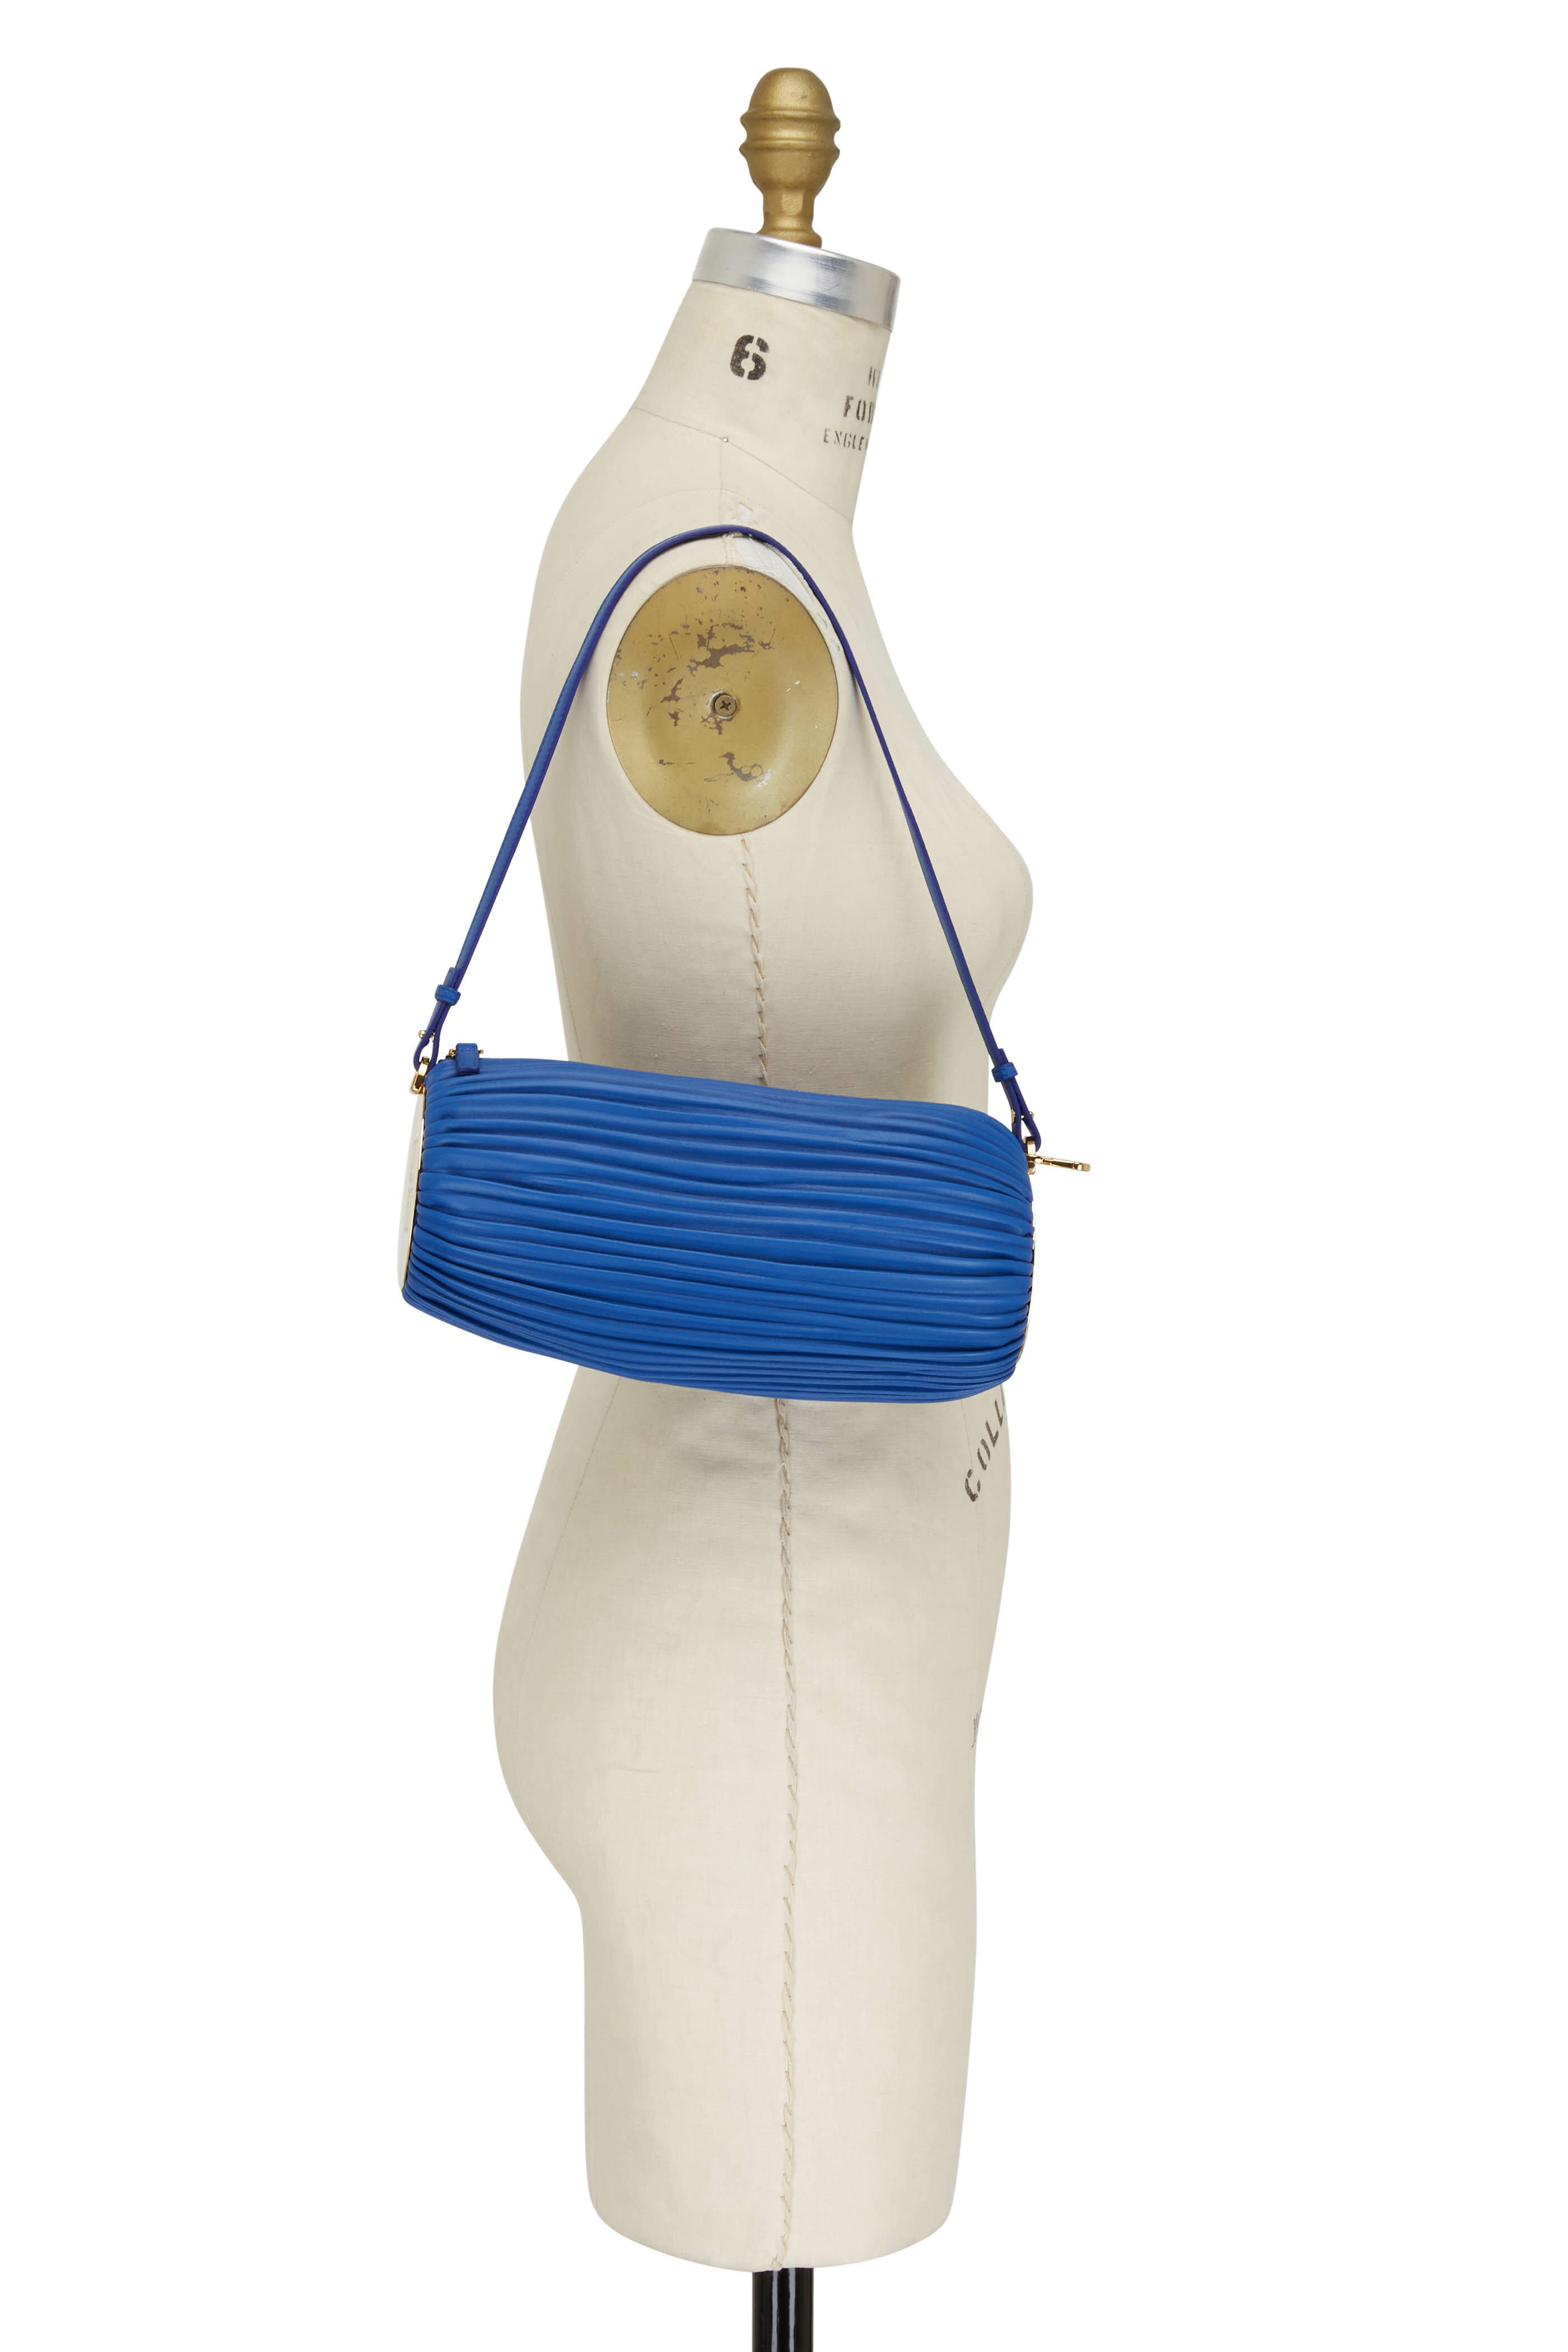 Loewe - Bracelet Royal Blue Leather Pouch Bag | Mitchell Stores